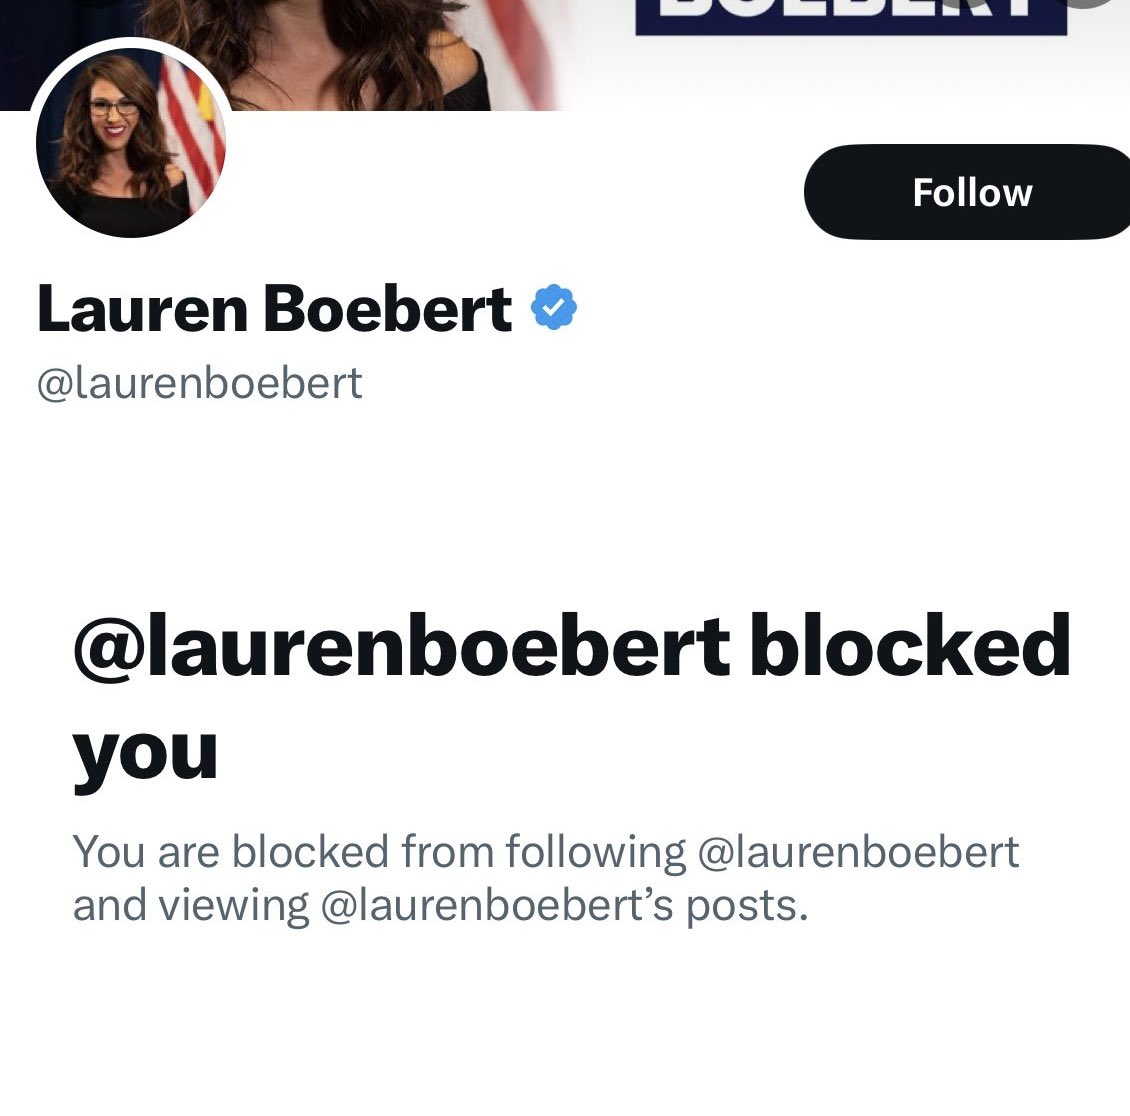 Is she allowed to block me? 🤦‍♂️🤦‍♂️🤦‍♂️